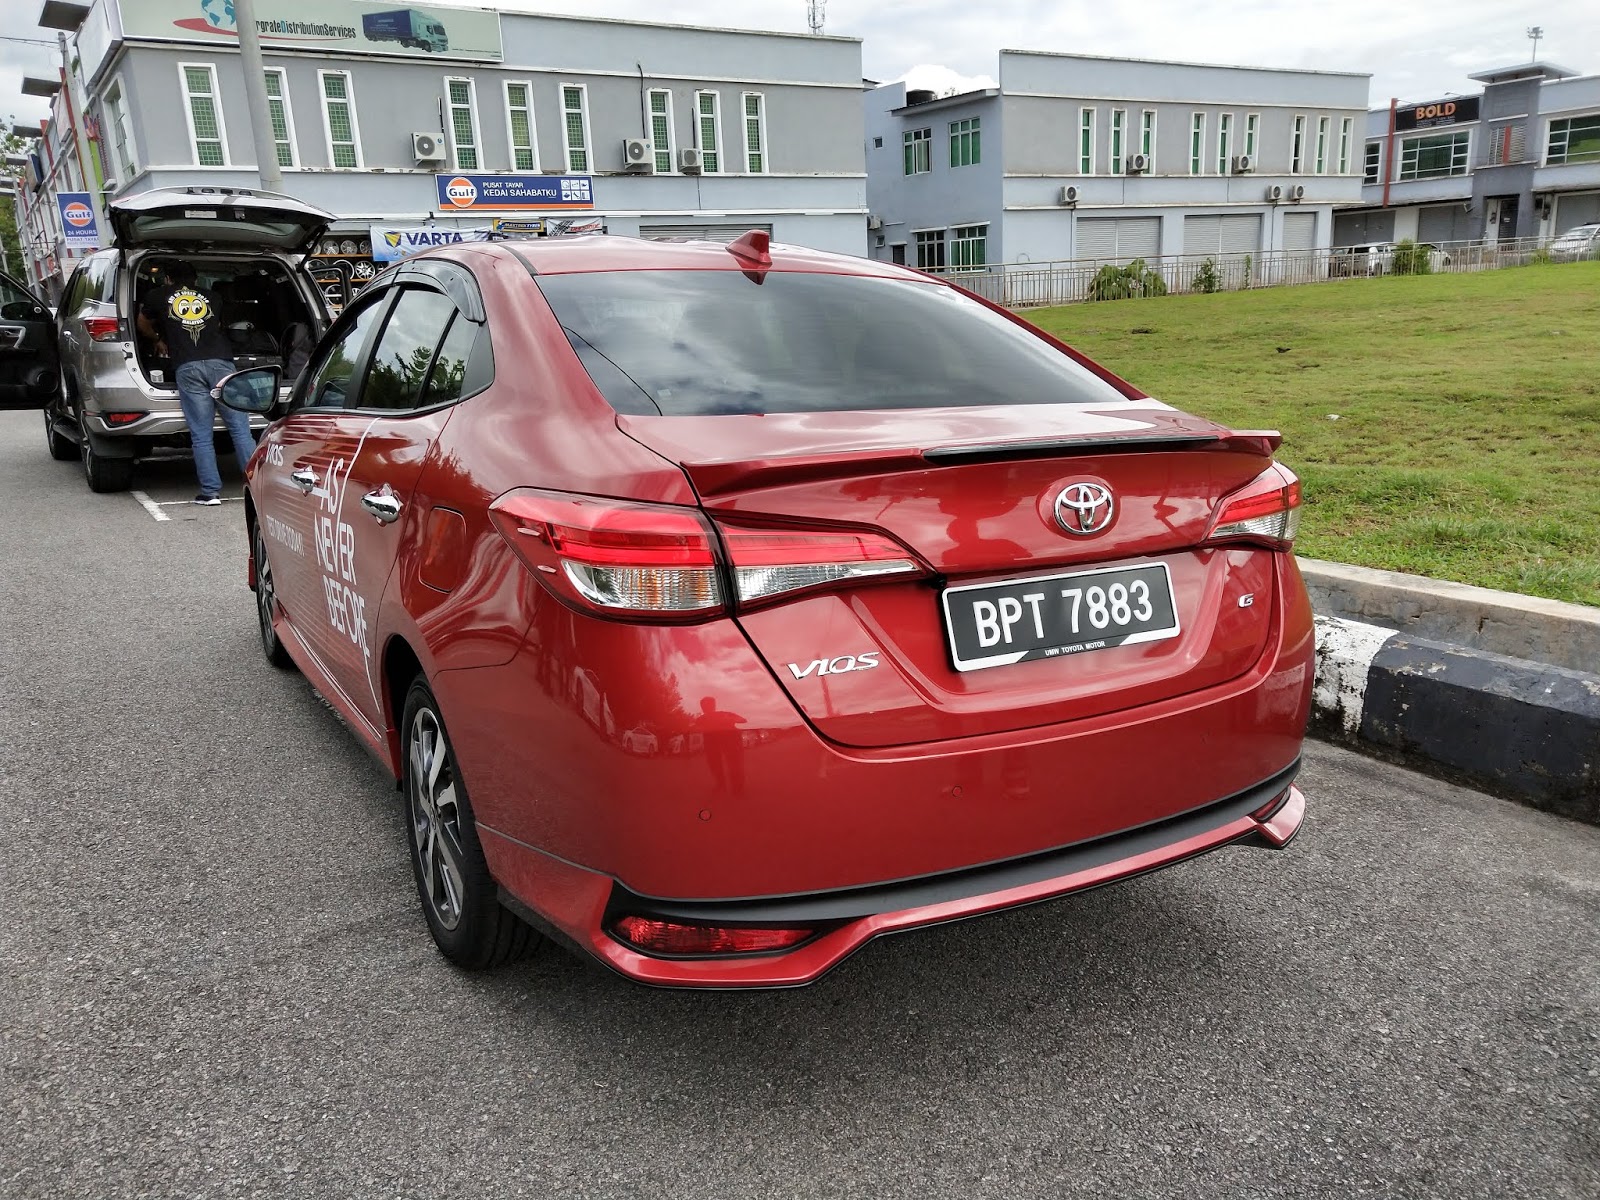 Motoring Malaysia All New 2019 Toyota Vios Test Drive